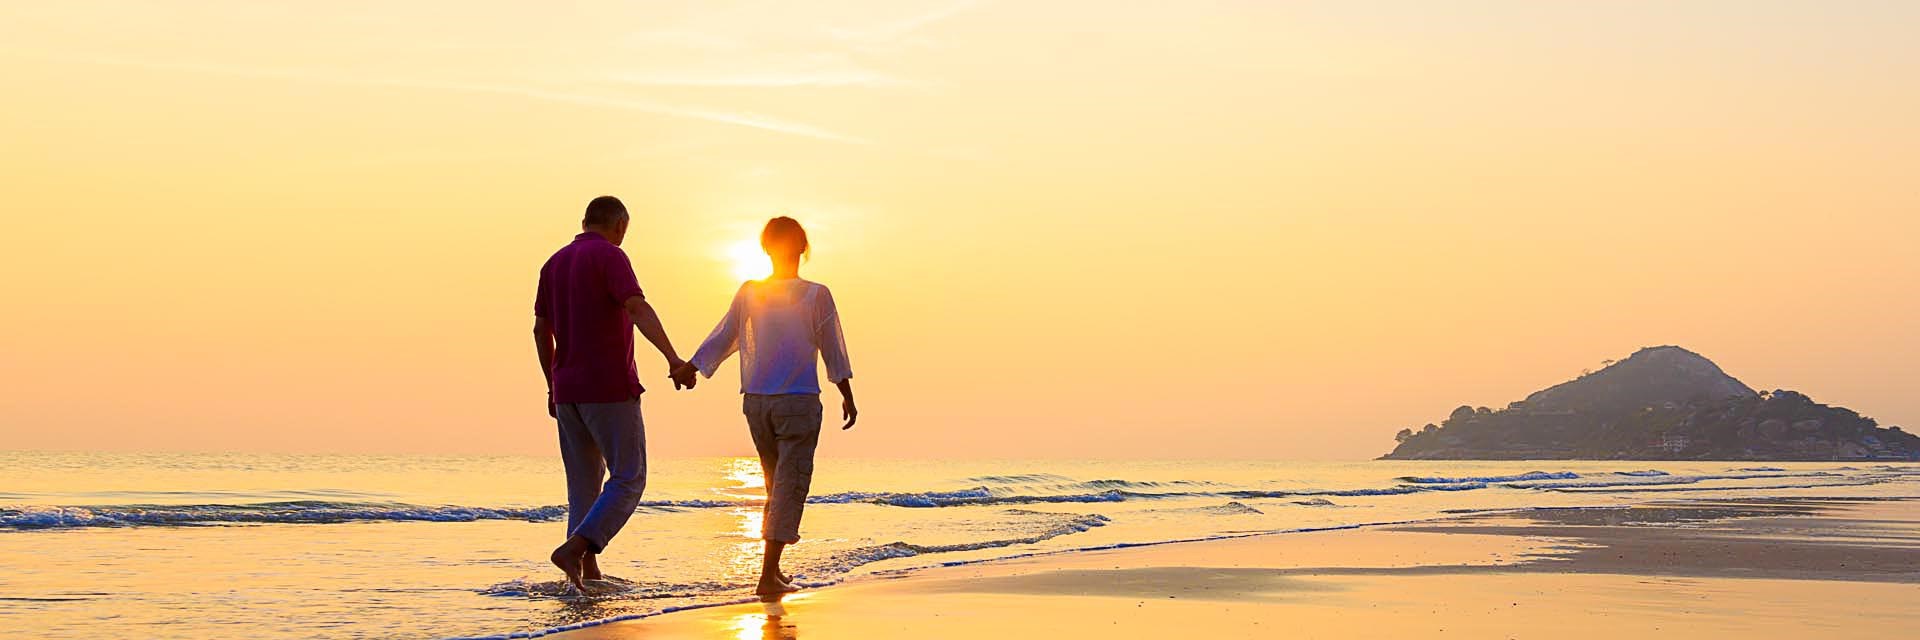 A couple holding hands on a beach in the evening